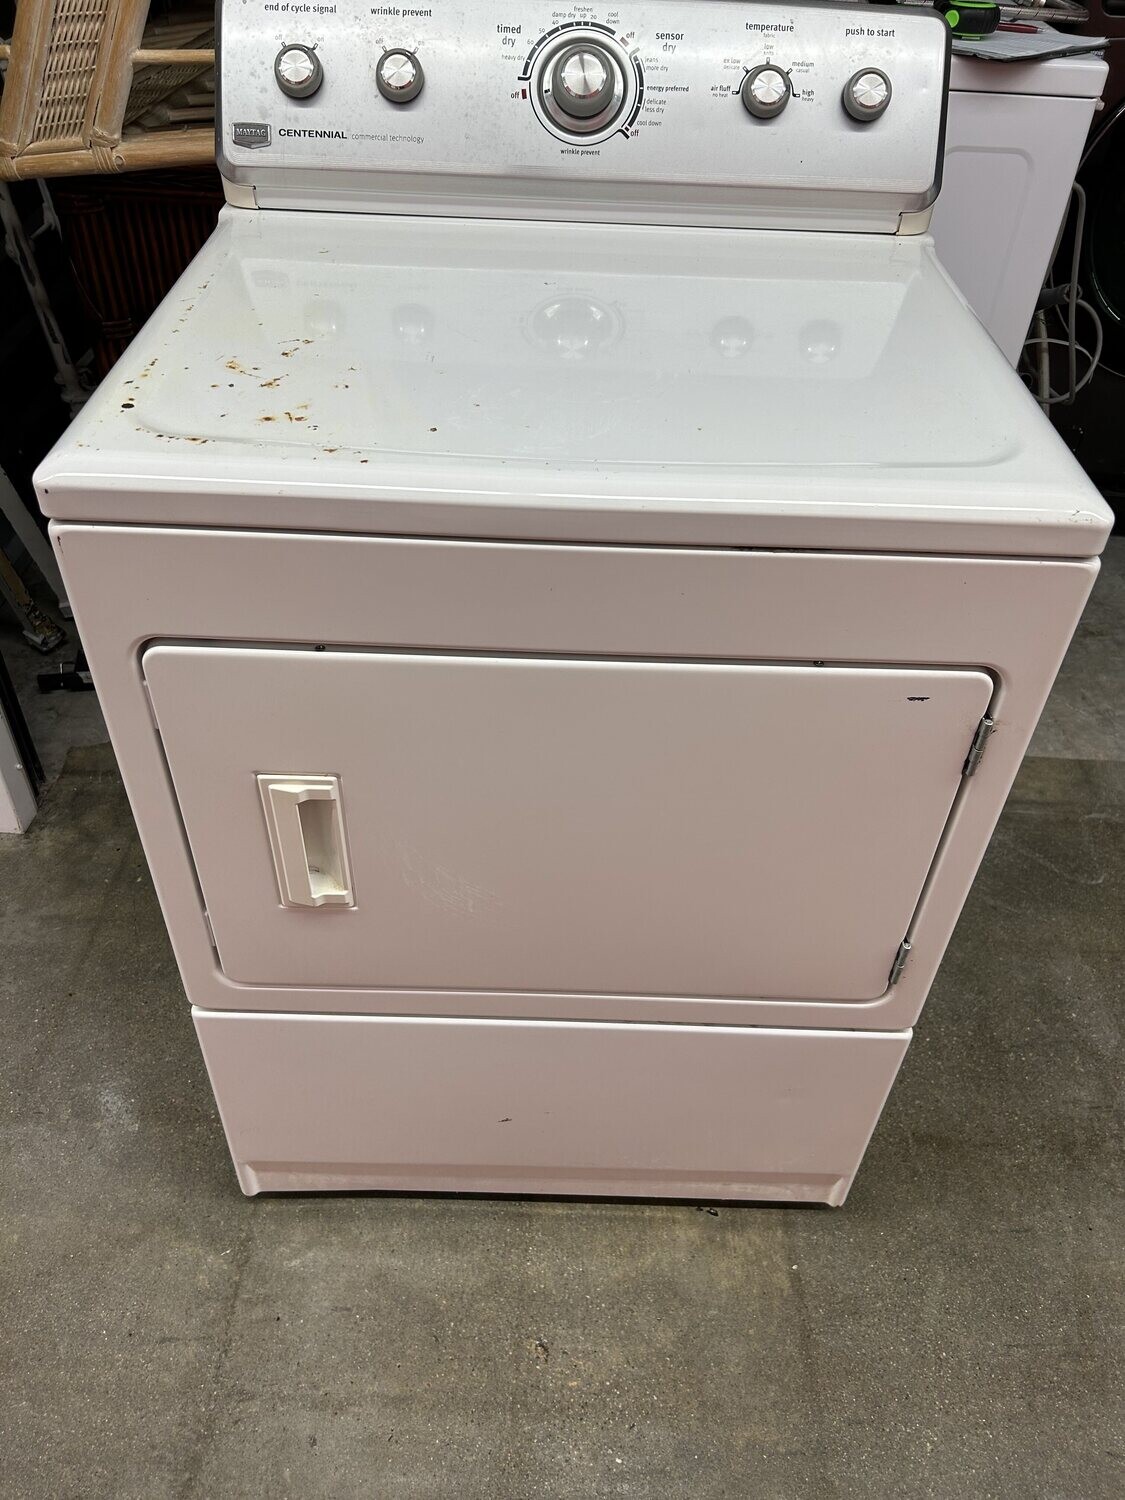 Maytag Centennial Dryer, 27" #1149 ** 1 wk to sell, full price